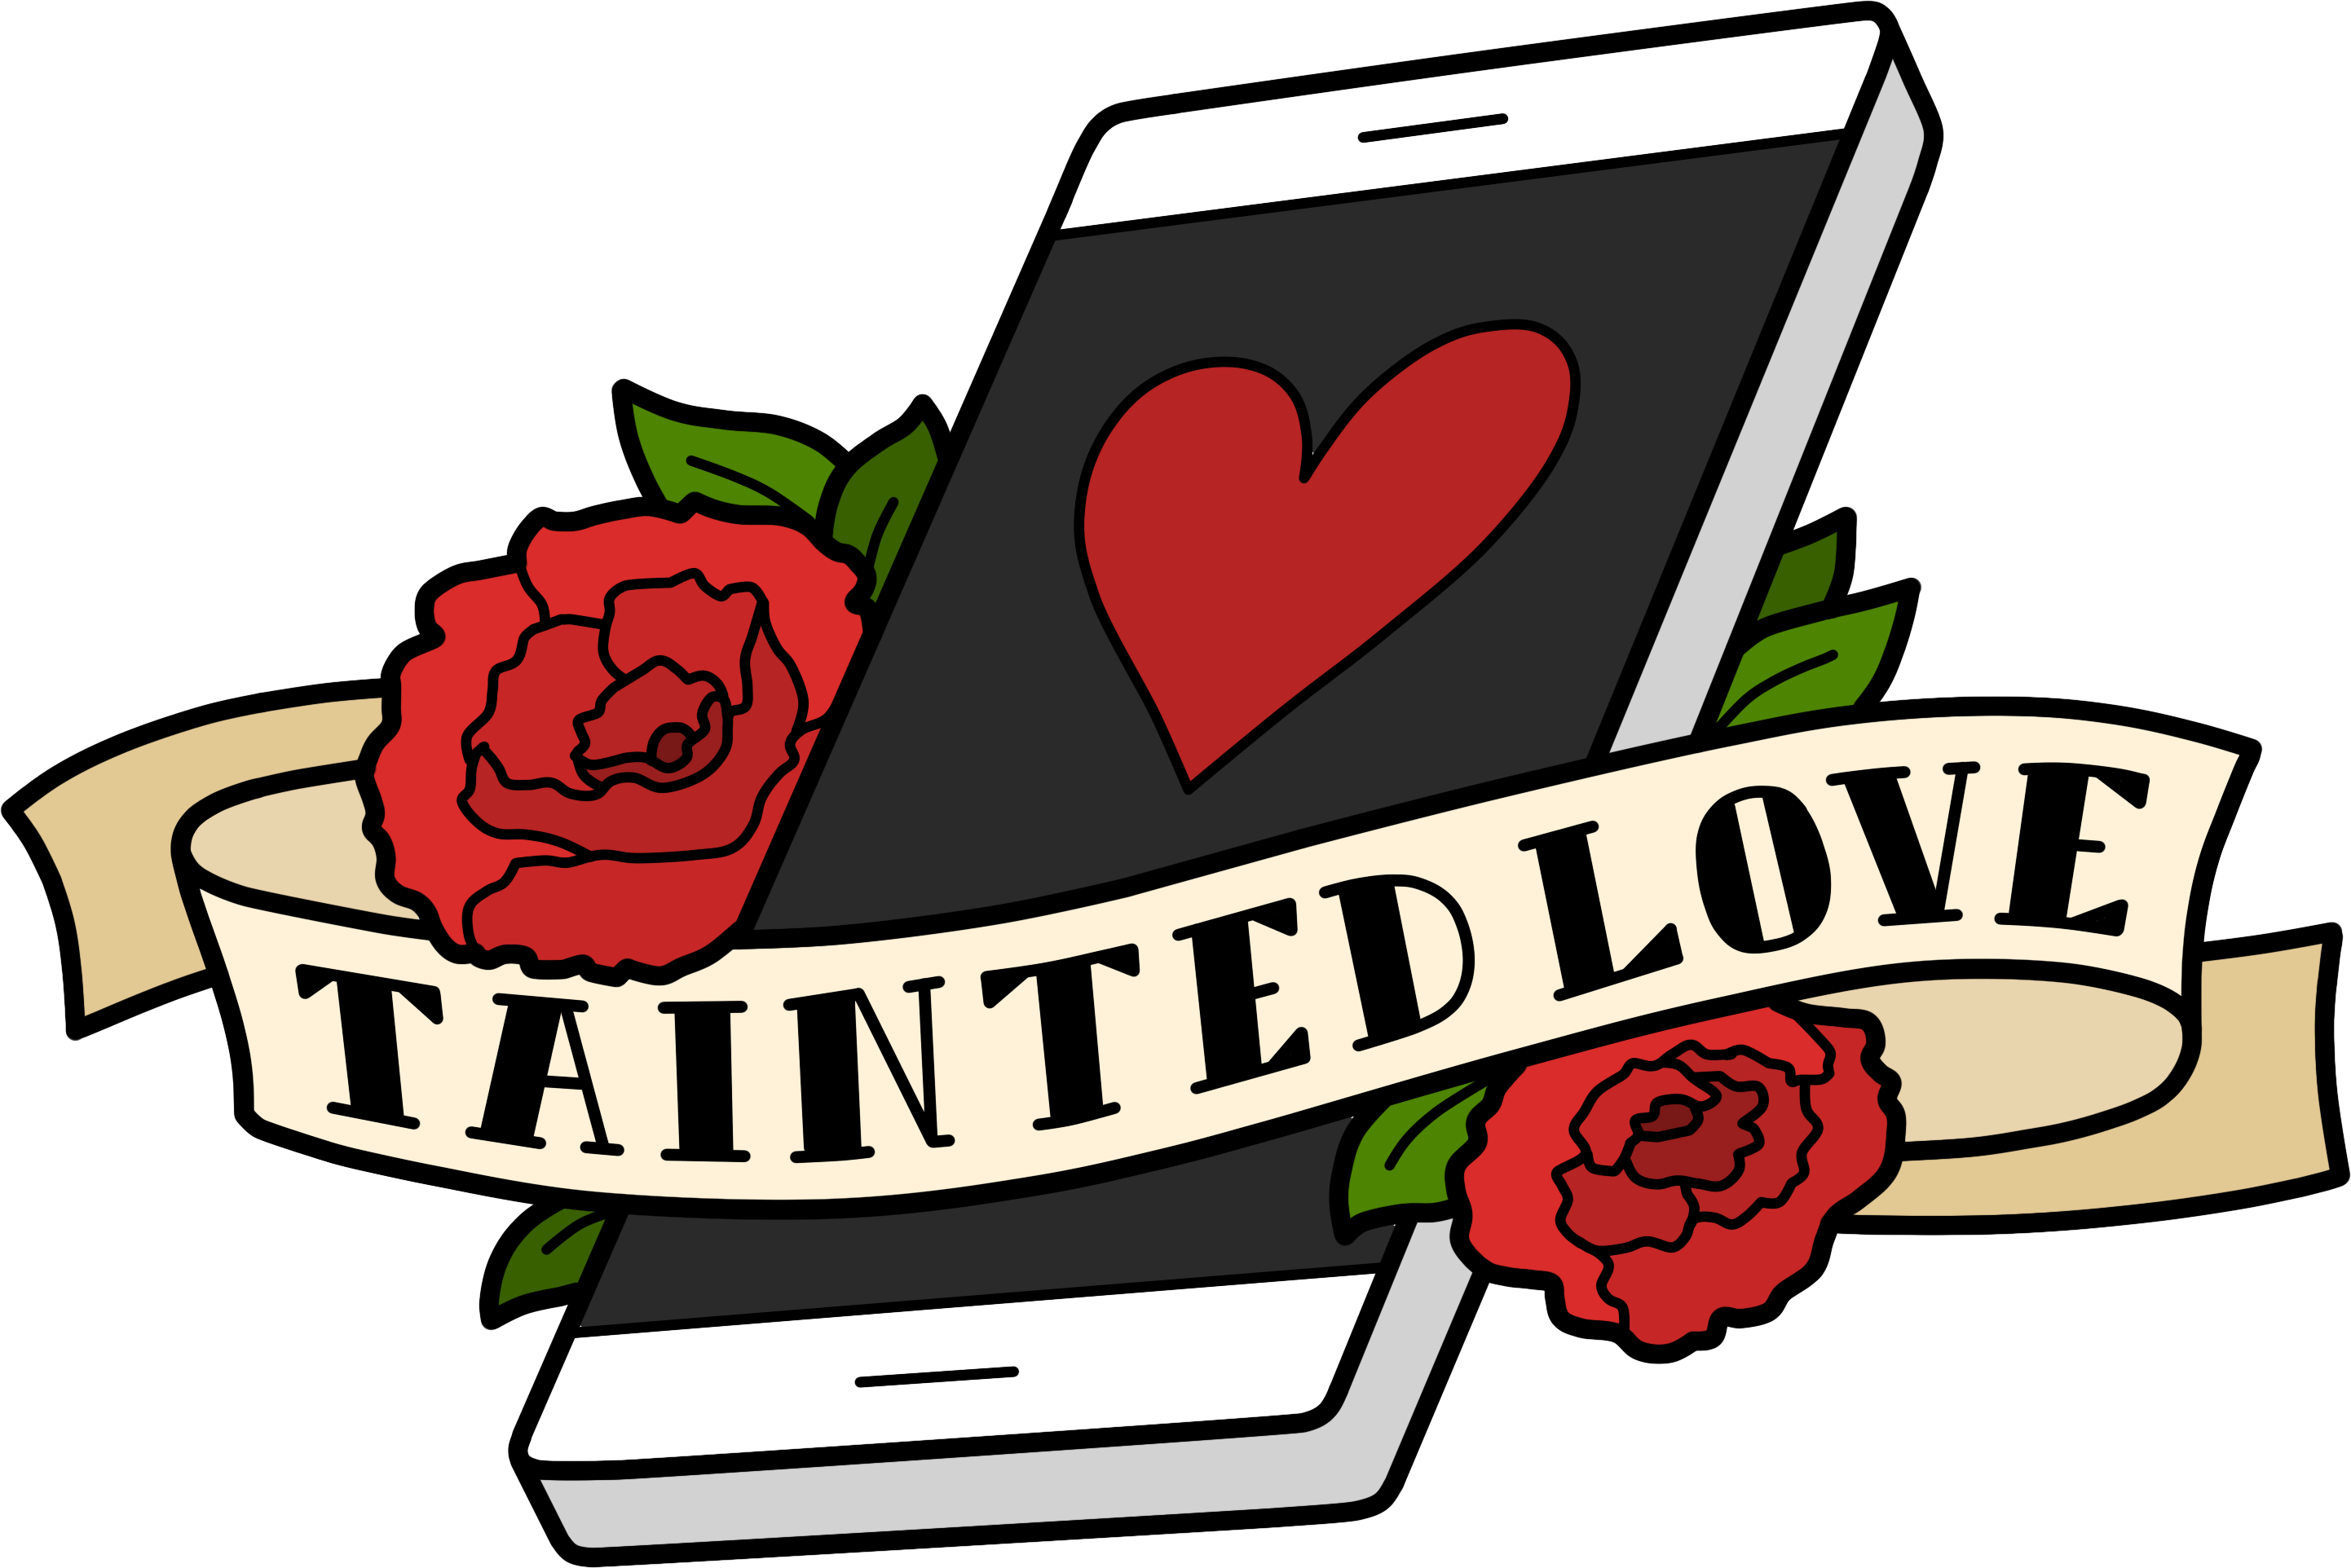 Tainted Logo - Tainted Love. Knowledge Integration eXhibition. University of Waterloo